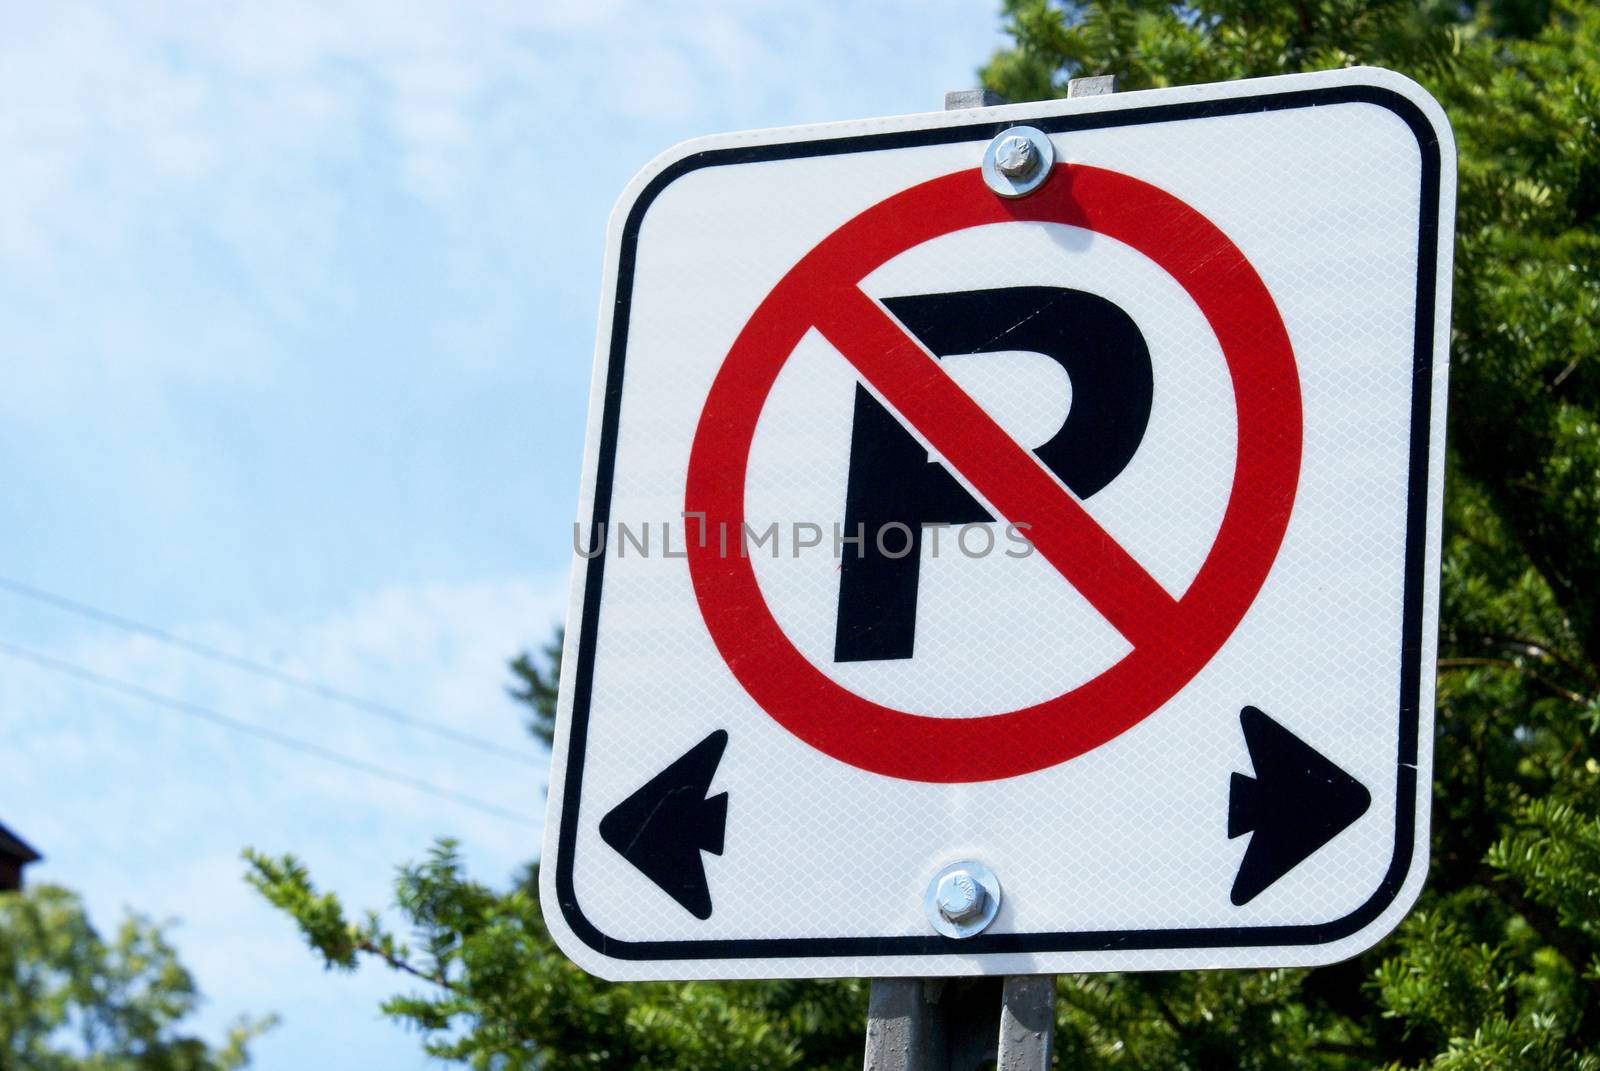 A horizontal closeup image focused on a no parking sign used in Canadian traffic laws.